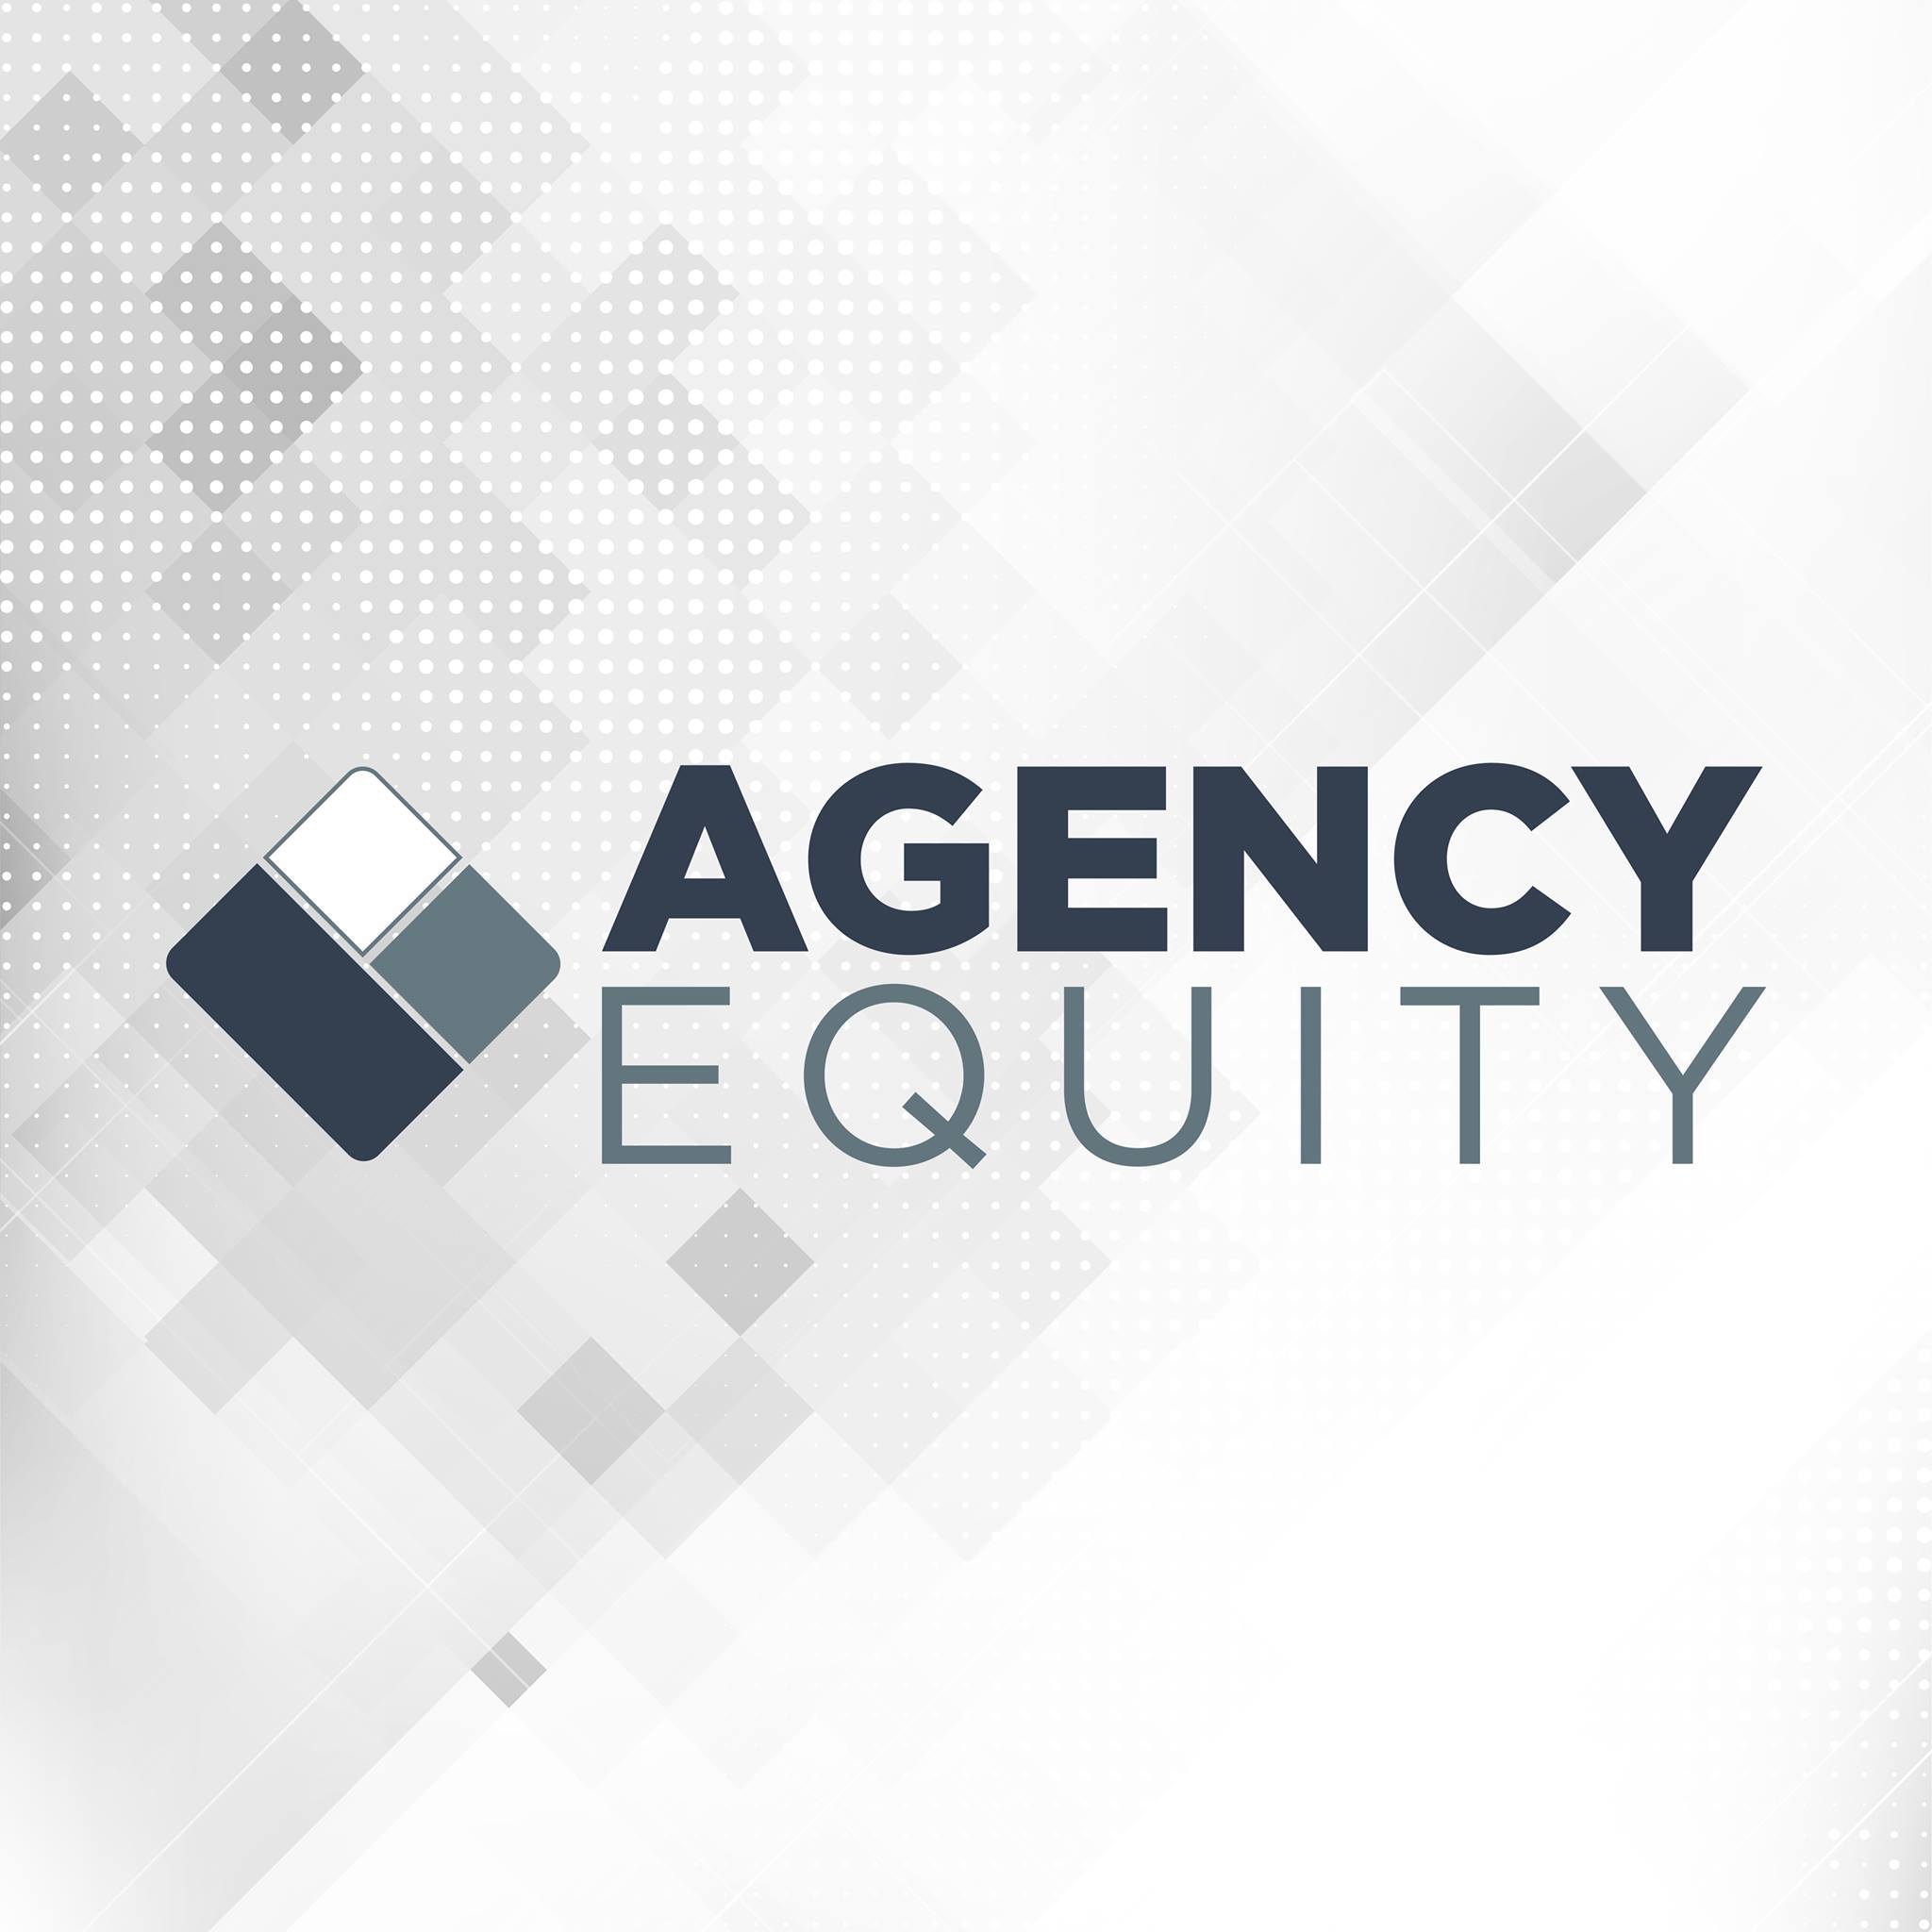 Agency Equity